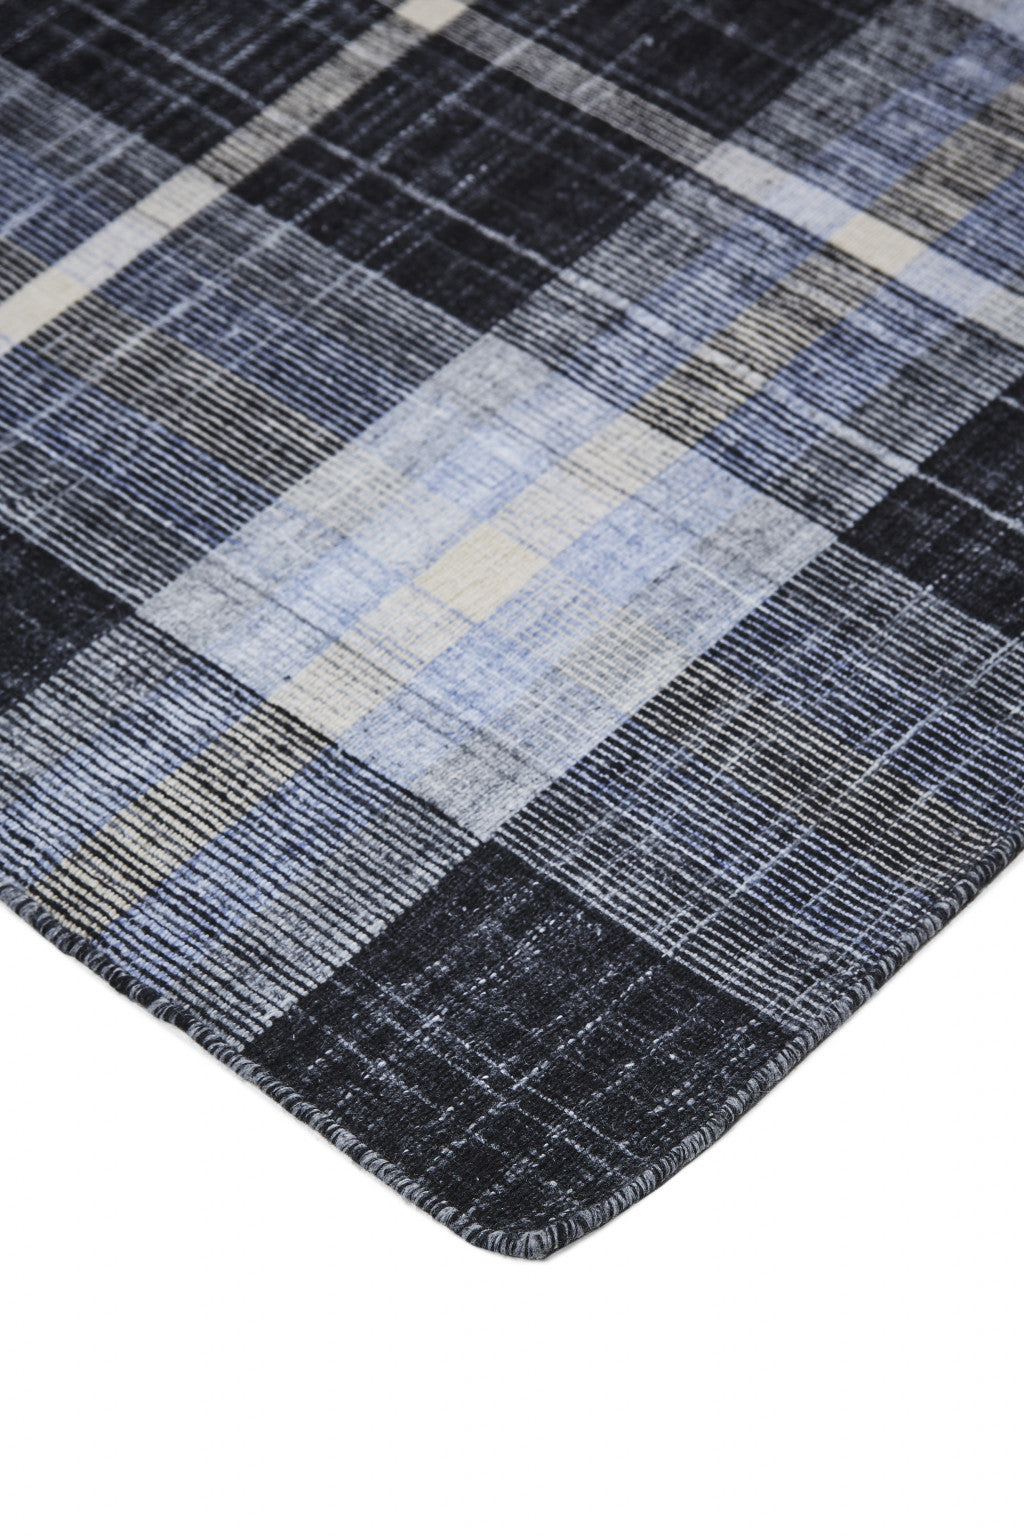 2' X 3' Black Blue And White Abstract Hand Woven Stain Resistant Area Rug